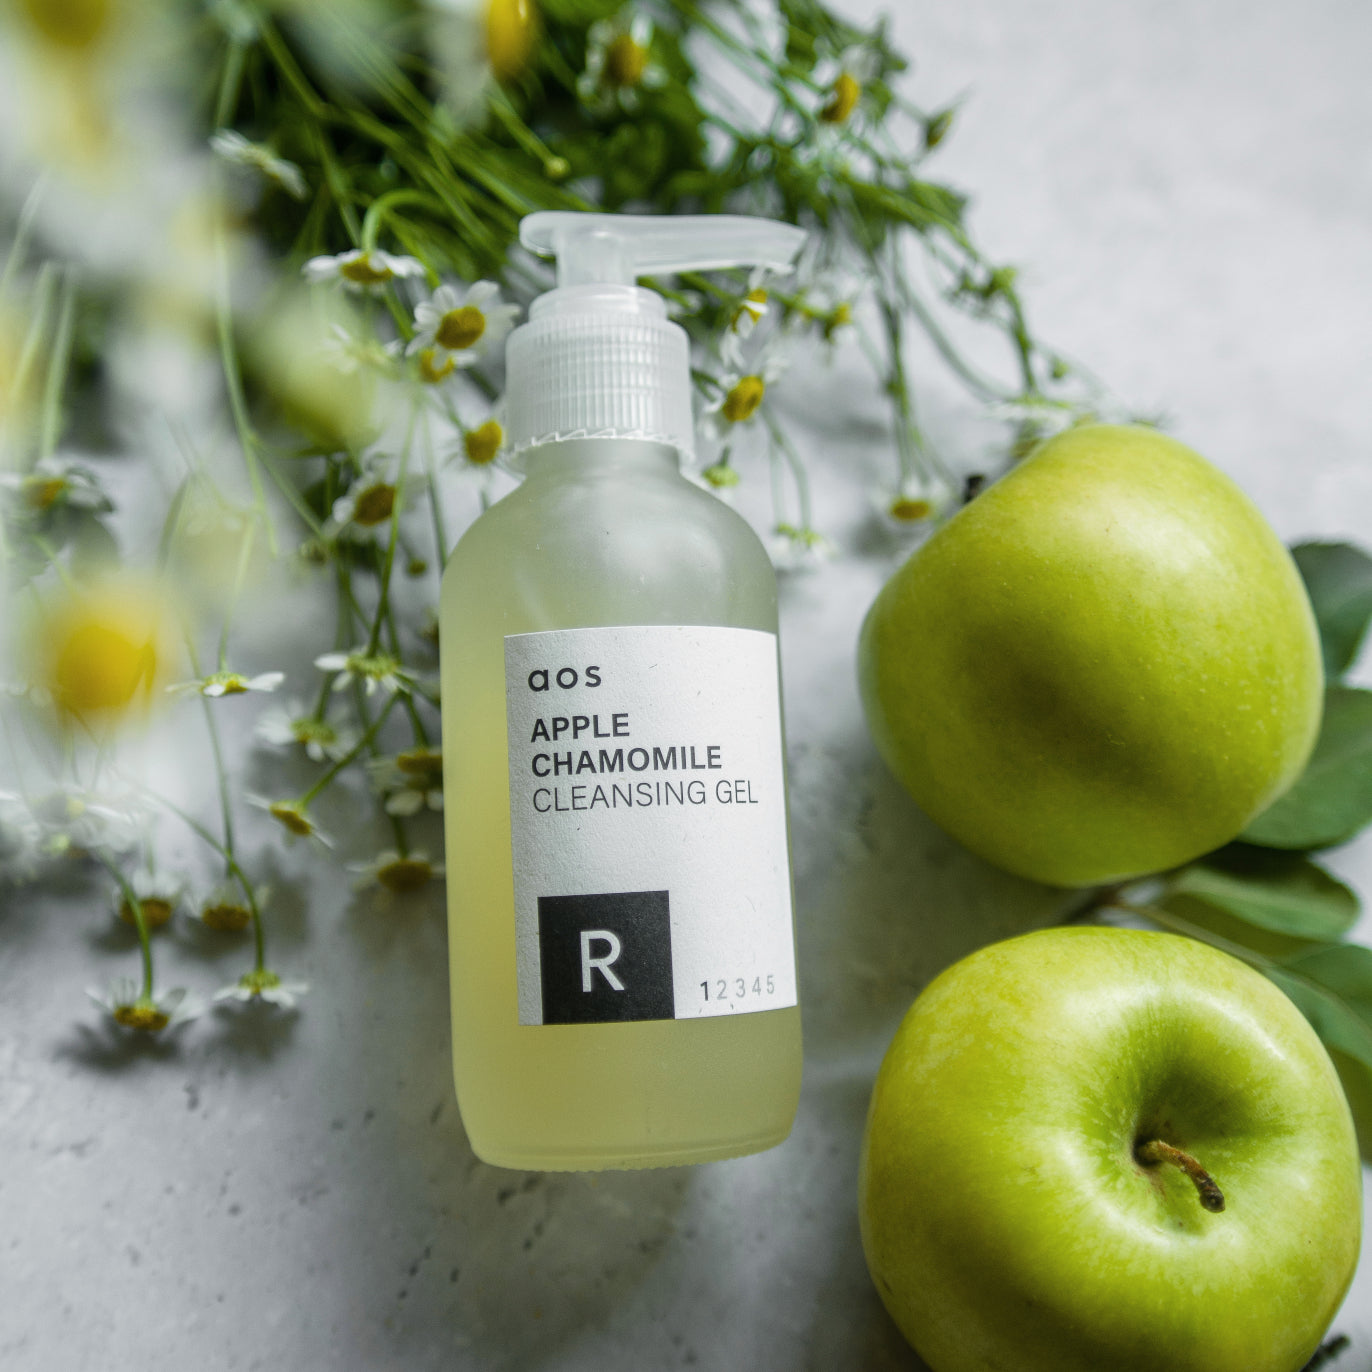 Apple Chamomile Cleansing Gel